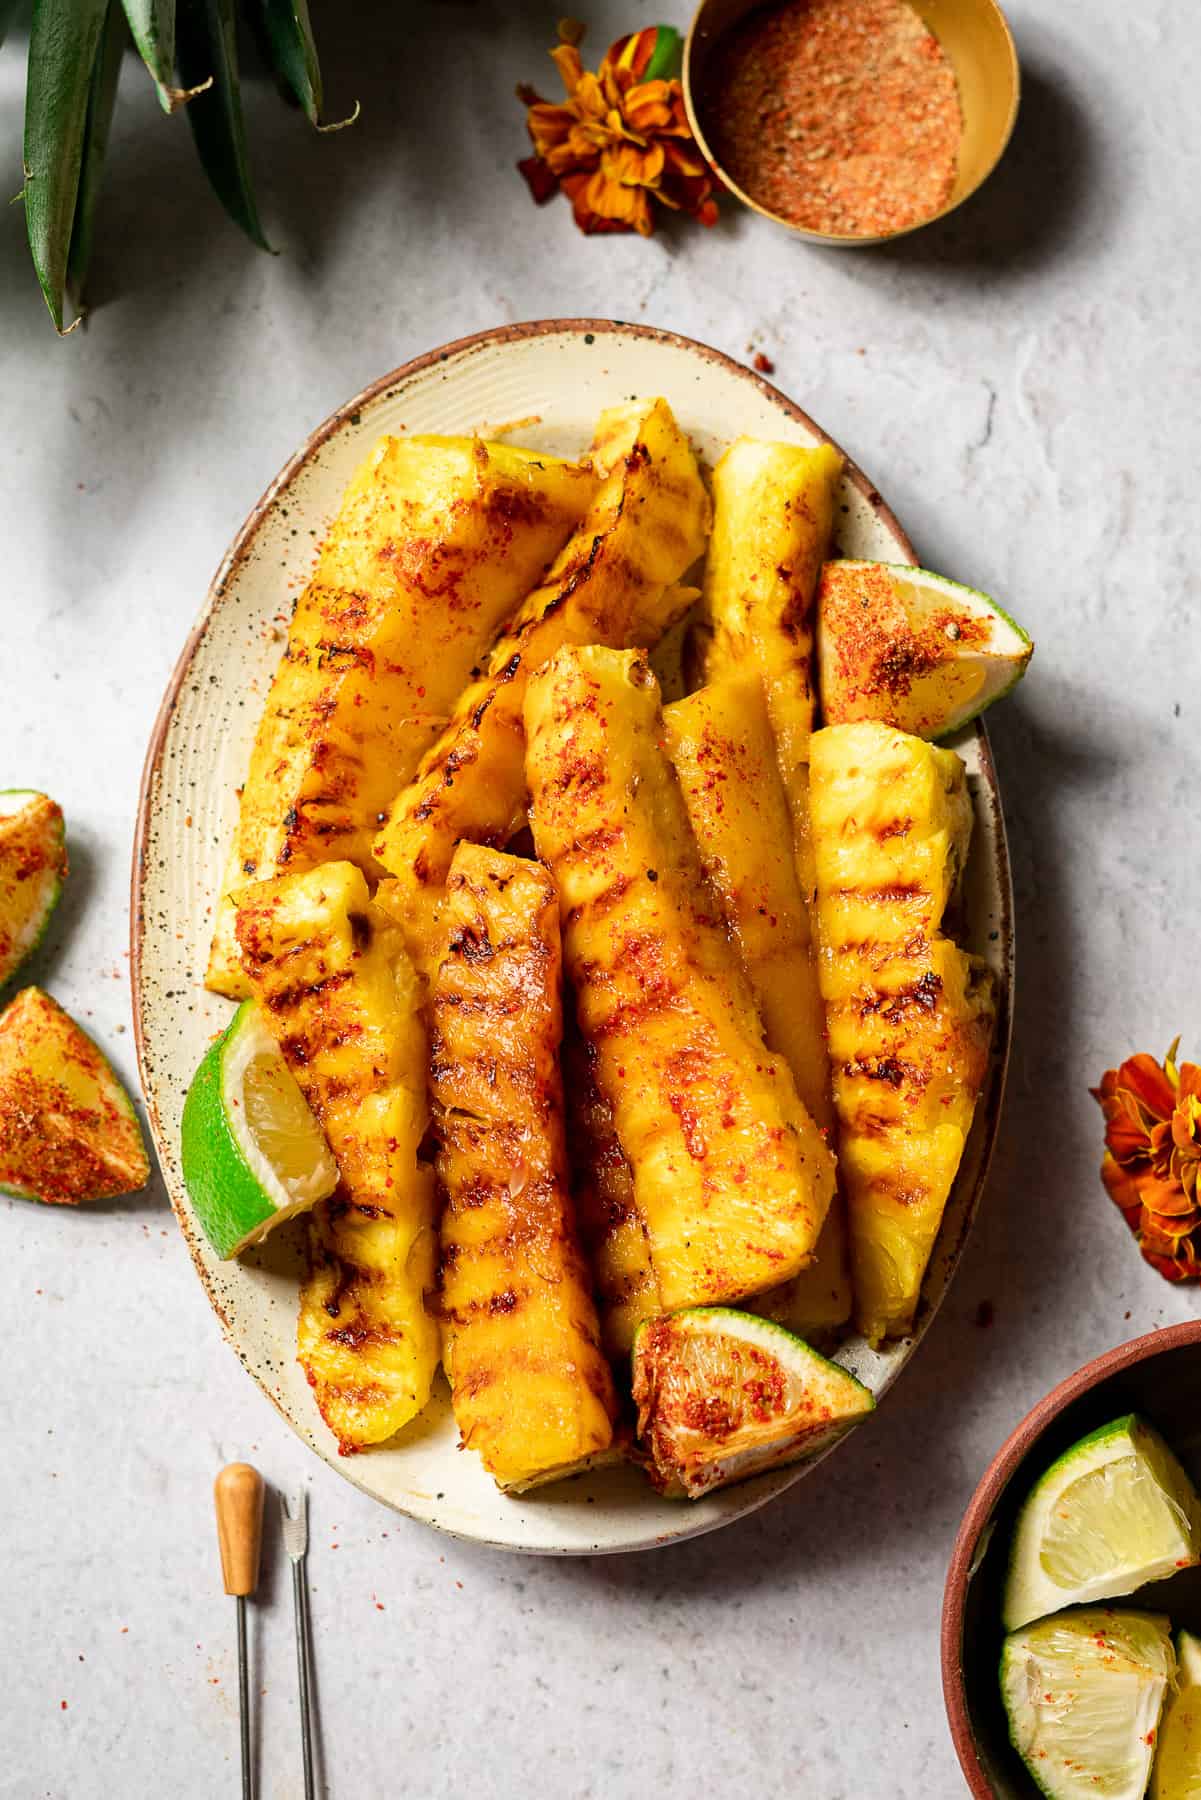 Grilled pineapple skewers are serving on a plate with lime wedges with chilies in the background.